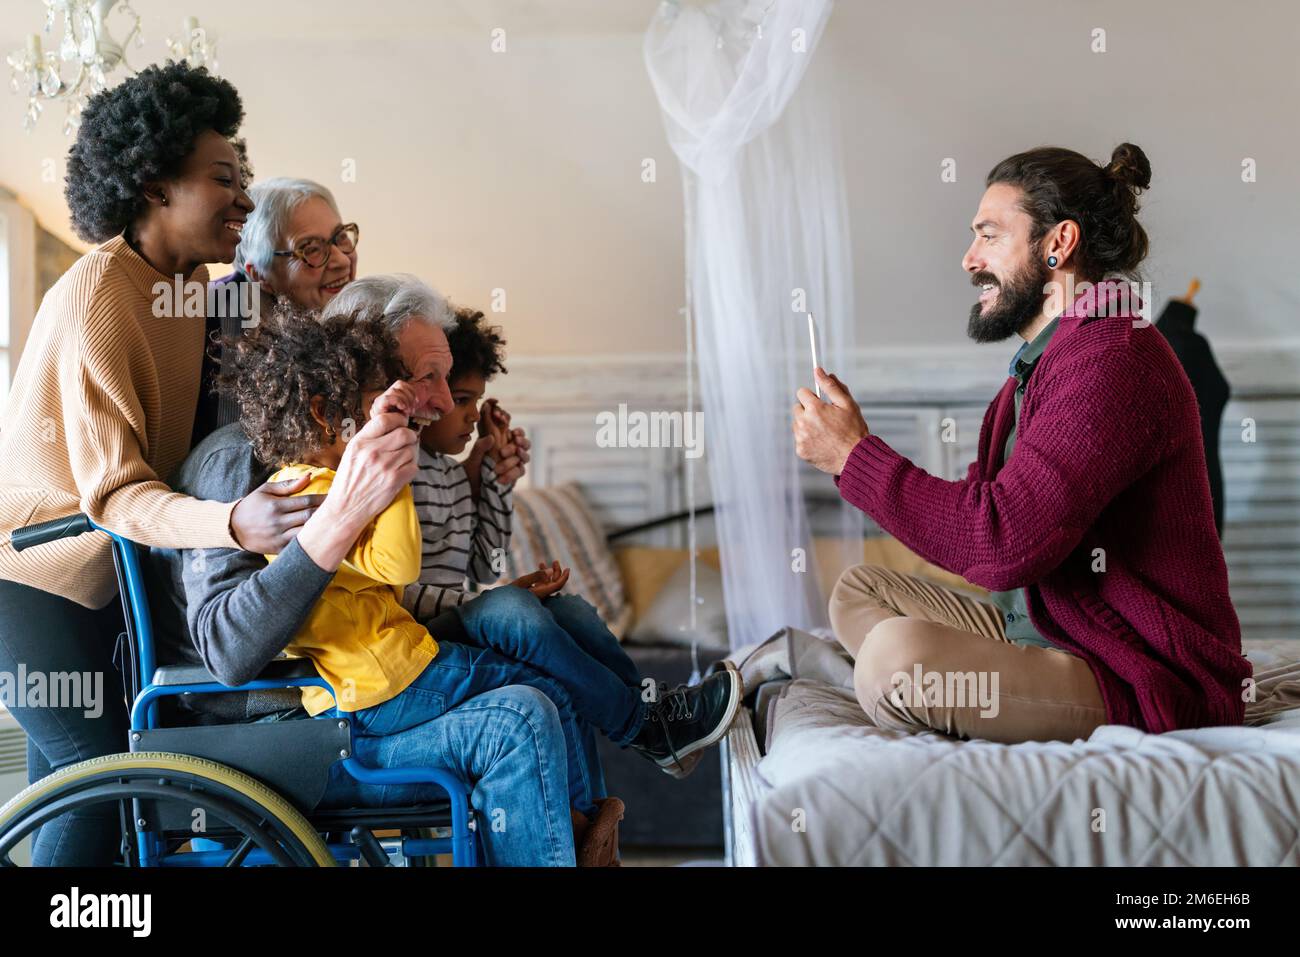 Portrait of multiethnic happy multi-generation family spending time together Stock Photo